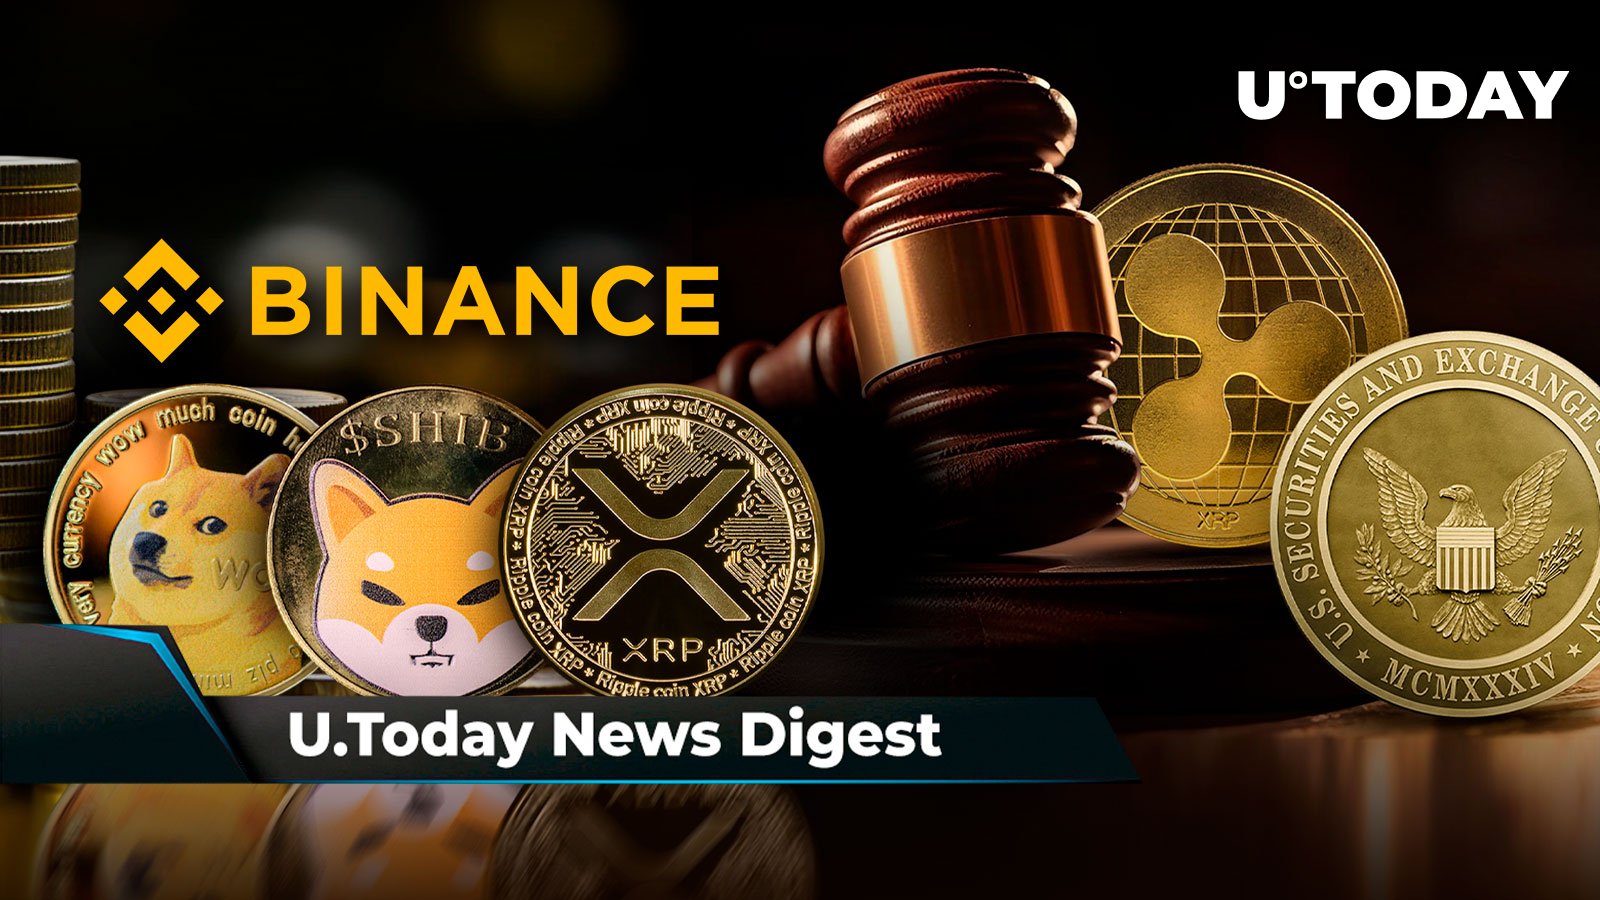 binance-doge-shib-and-xrp-reserves-top-100-ripple-files-crucial-request-in-sec-lawsuit-bitcoin-wallet-activity-dips-despite-etf-approvals-crypto-news-digest-by-u-today